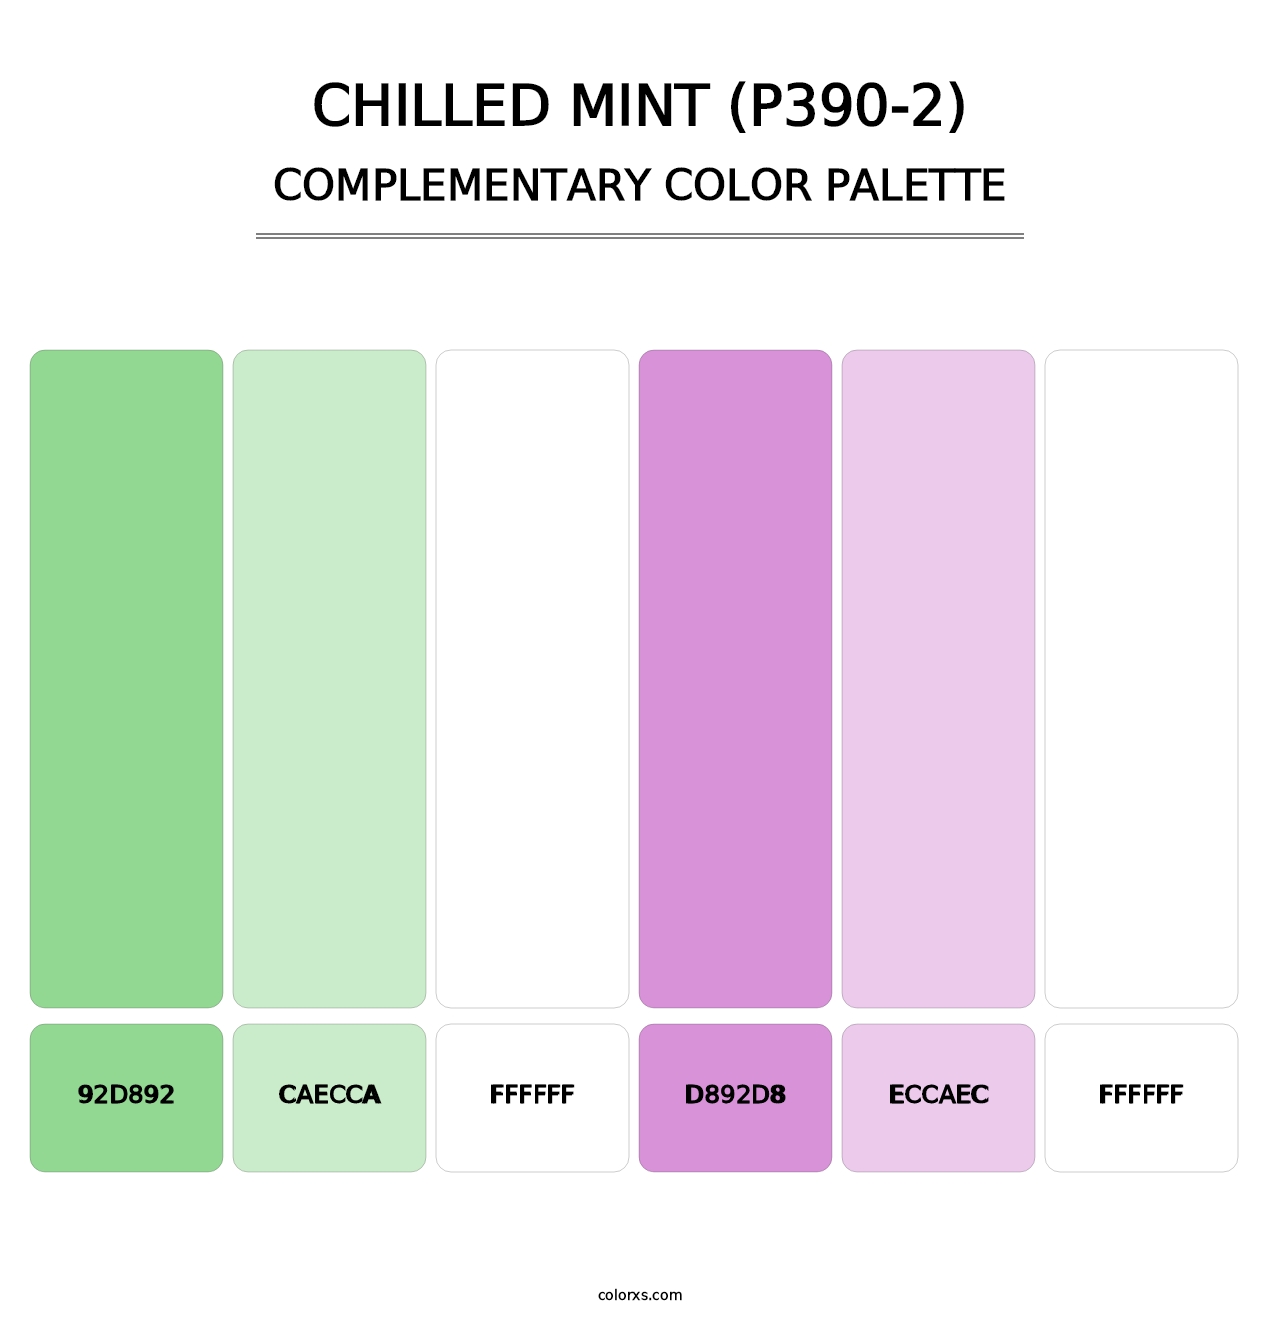 Chilled Mint (P390-2) - Complementary Color Palette